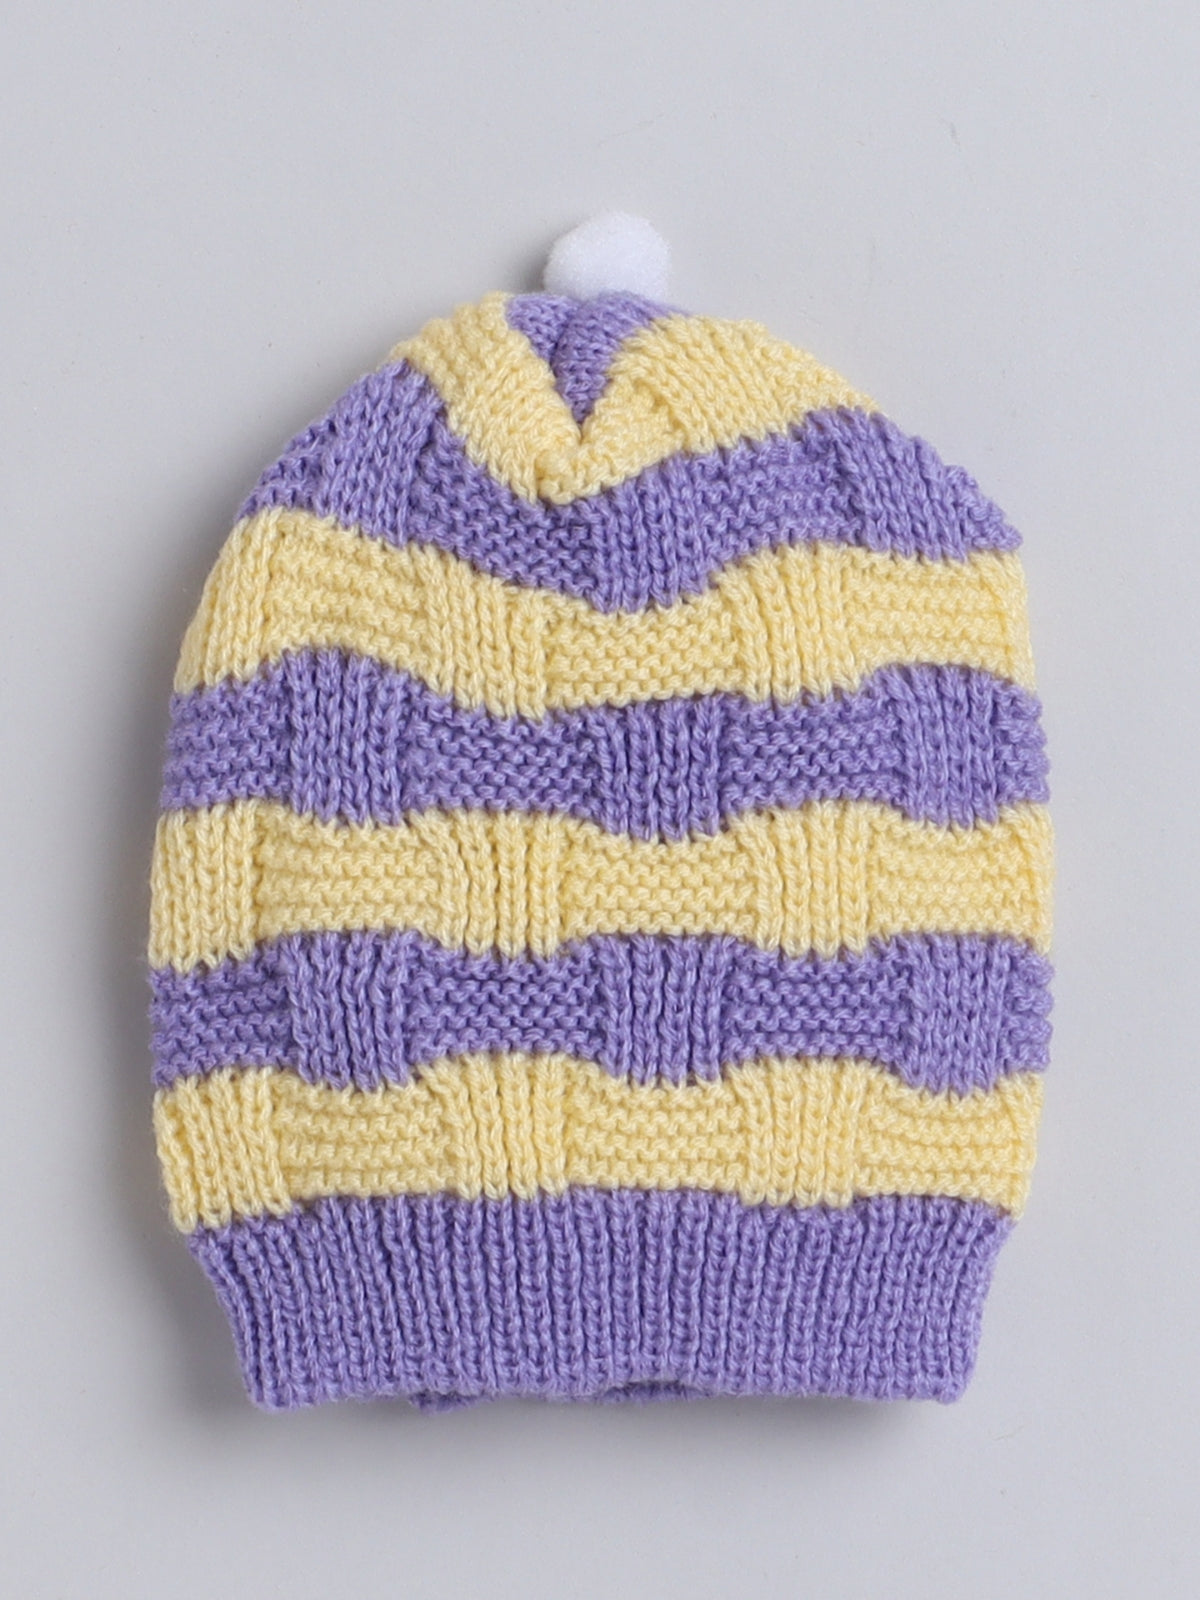 Knitted Stripe Pattern round cap for babies